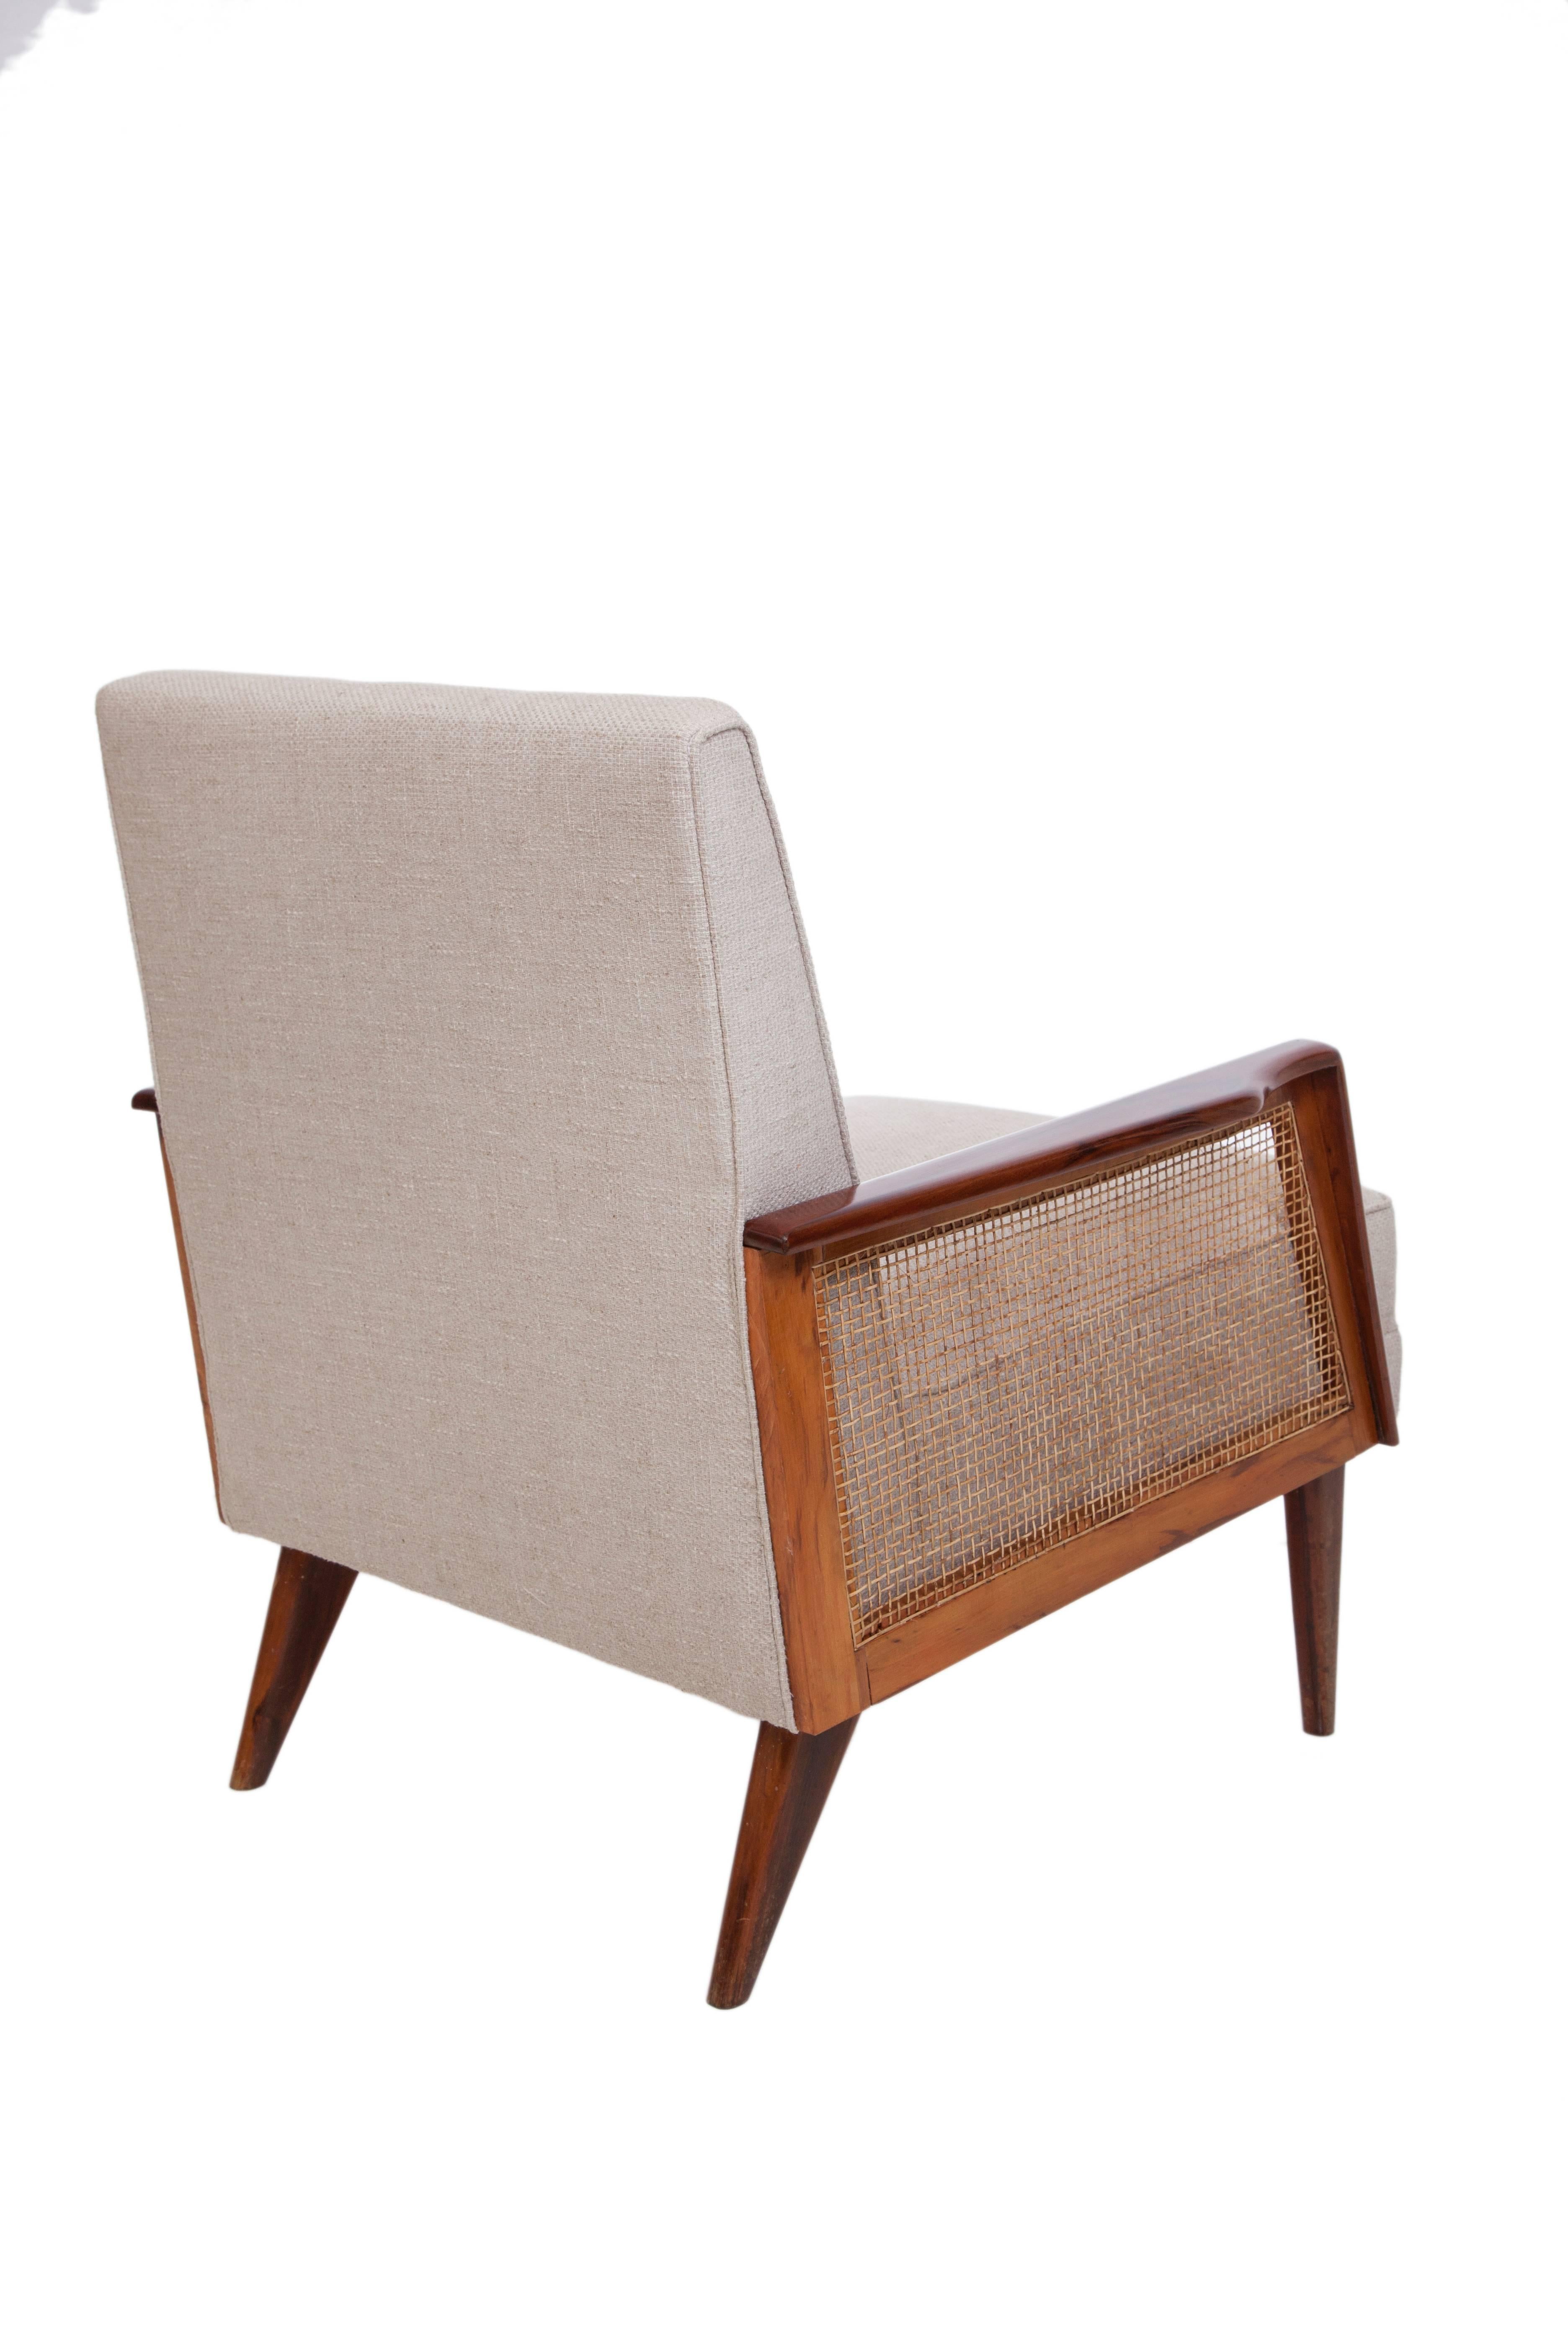 Mid-Century Modern Midcentury Brazilian Caviuna Armchair Upholstered in Linen with Caned Sides